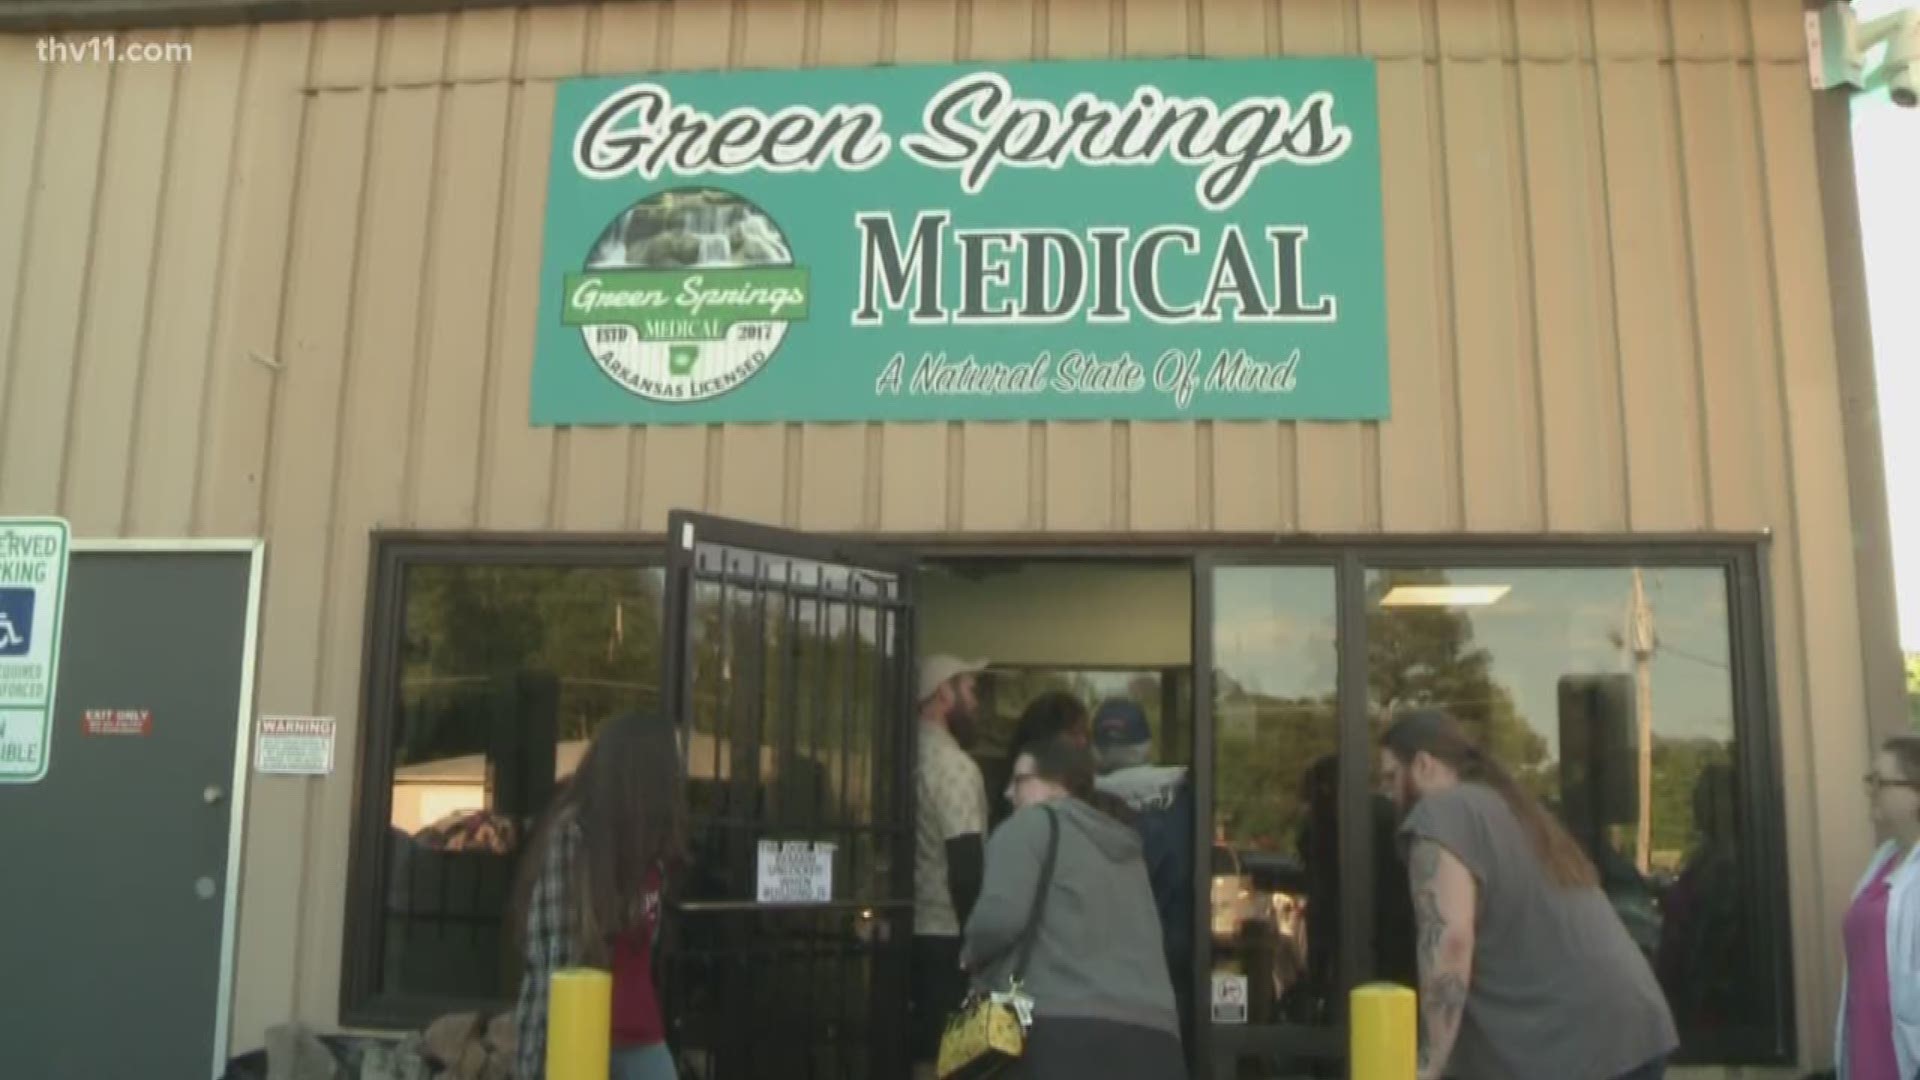 "I'm tired of taking opiates, I don't like taking opiates." Customers at Hot Springs medical marijuana dispensary flock from across the state for the newly-legalized solution to chronic pain and other ailments.